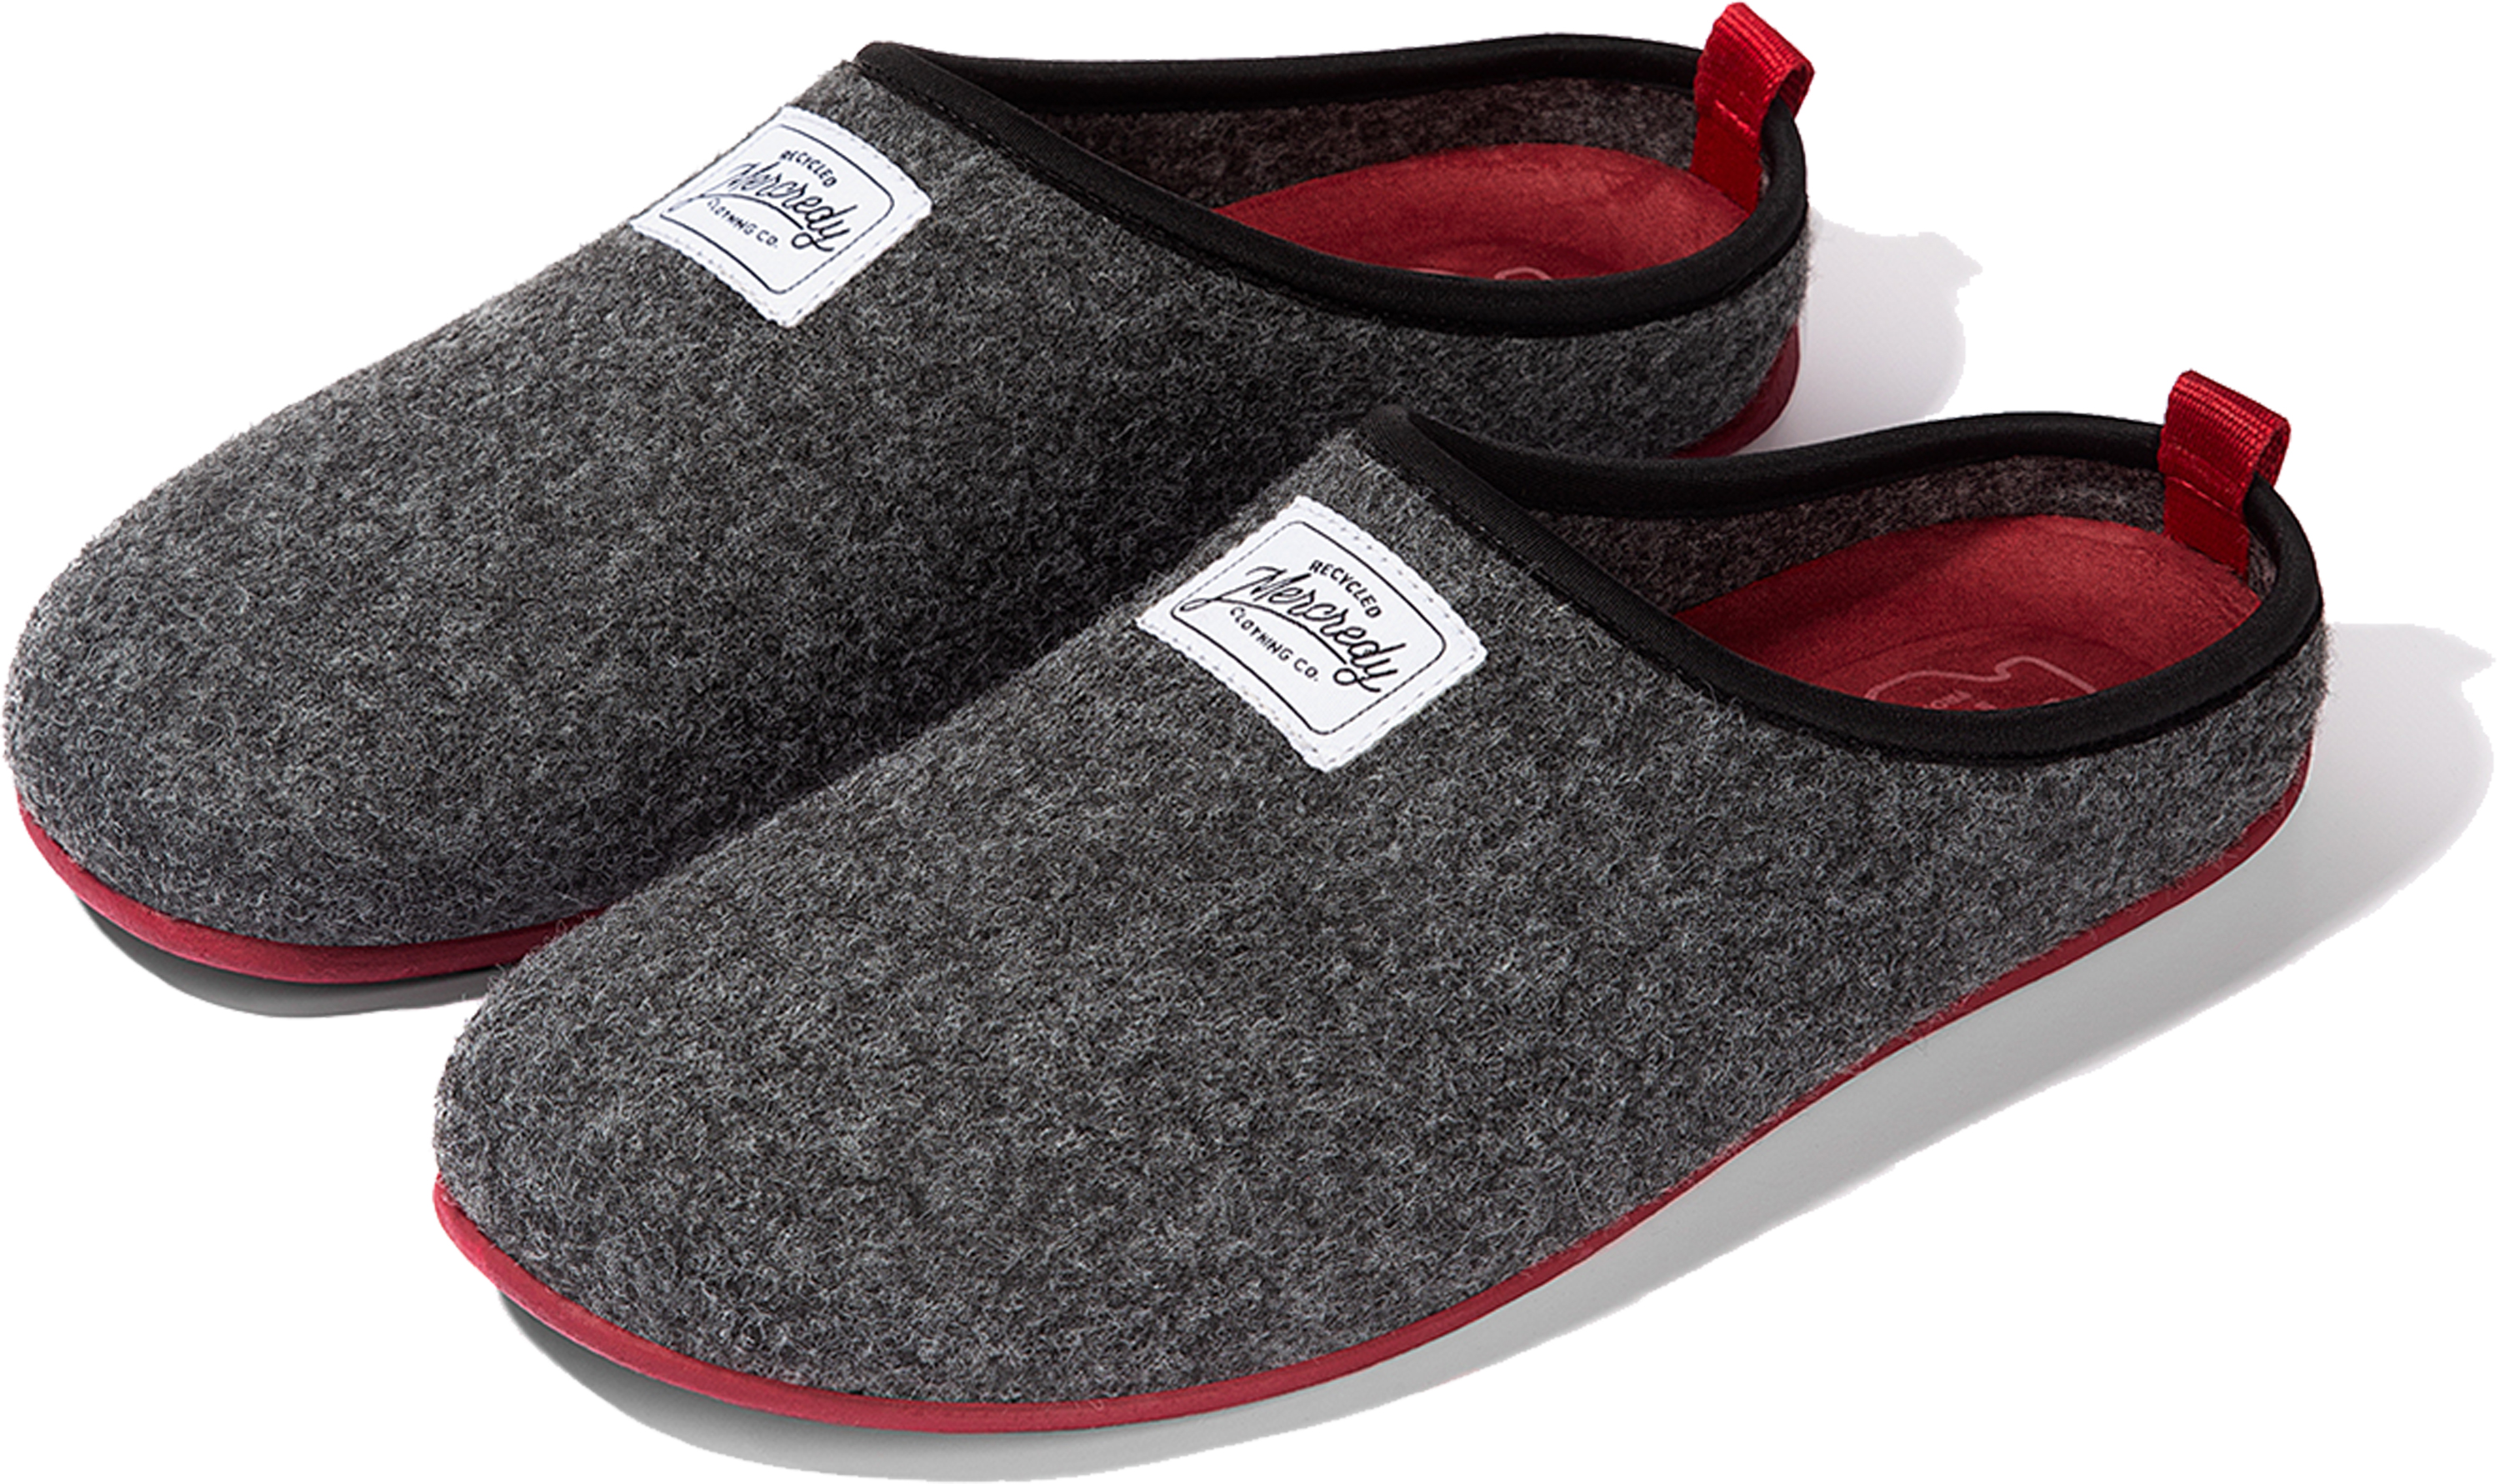 Mercredy Charcoal/Red Classic Slipper size 7/8